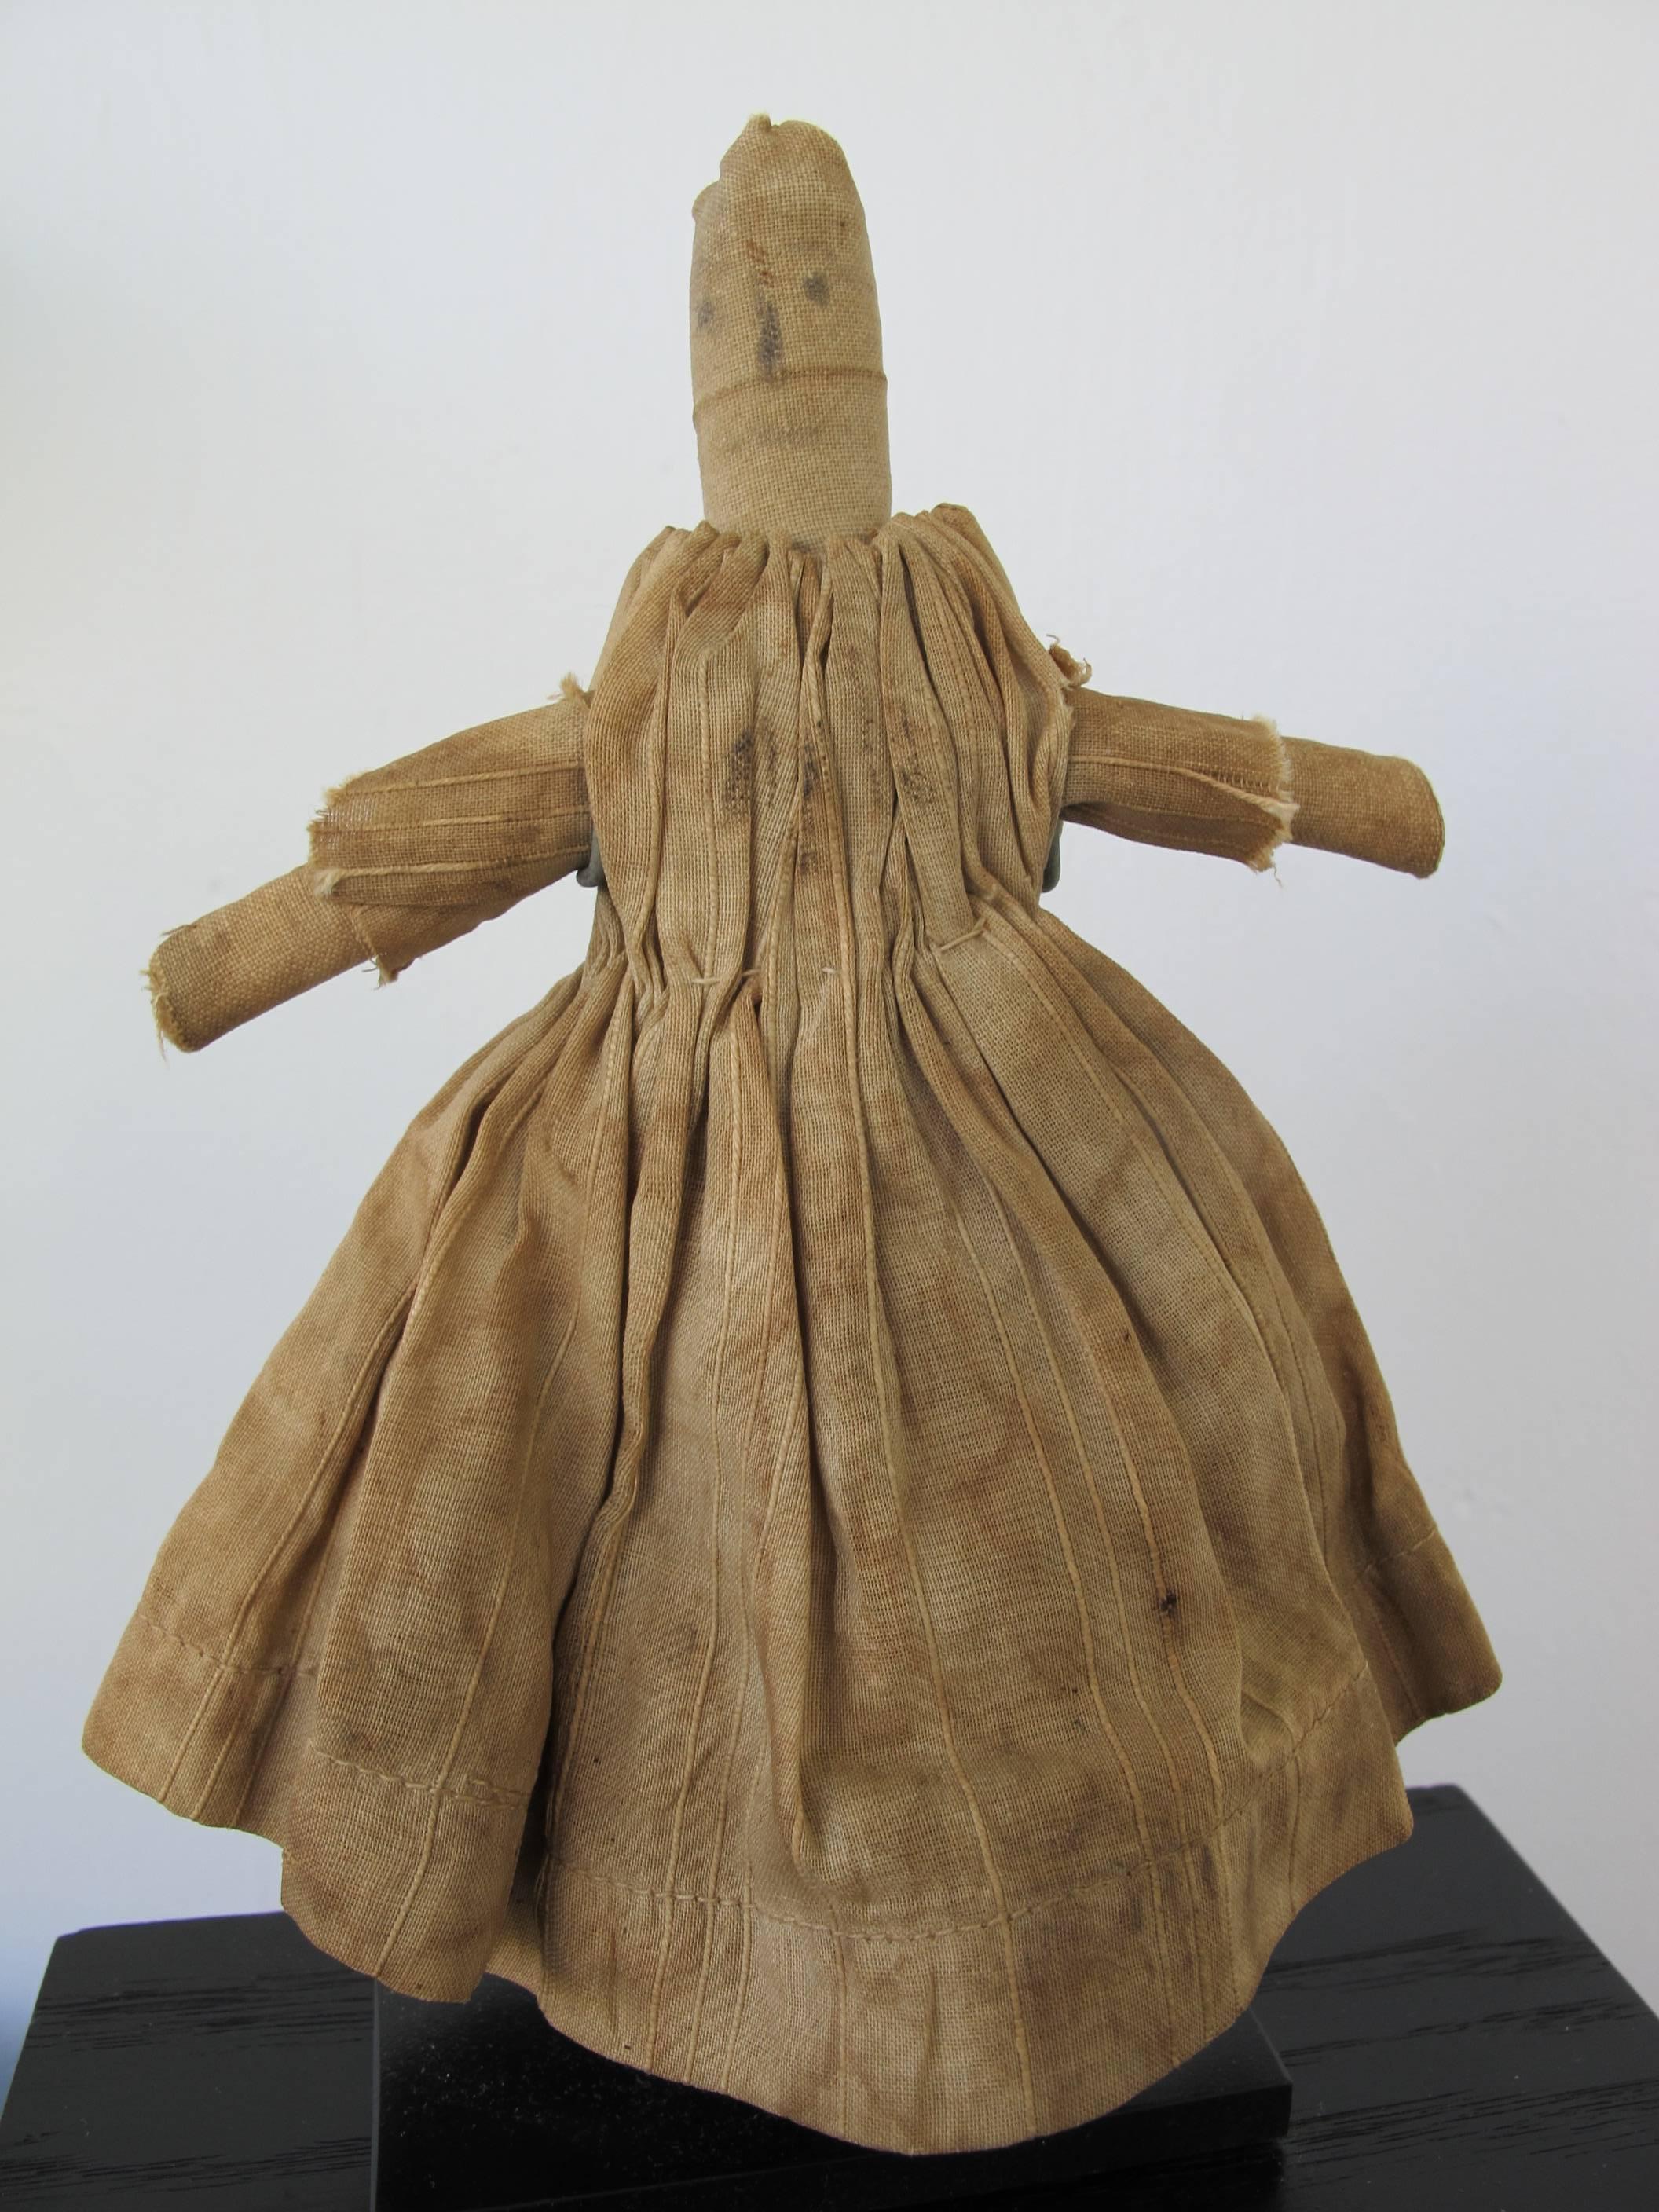 Simple cloth doll of homespun linen with rolled cloth raised arms, legs and head.
The gathered dress was once blue and is now a mottled tan. Mounted on metal base. Pictured in American Folk Dolls by Wendy Lavitt. illus. page 21, full page.